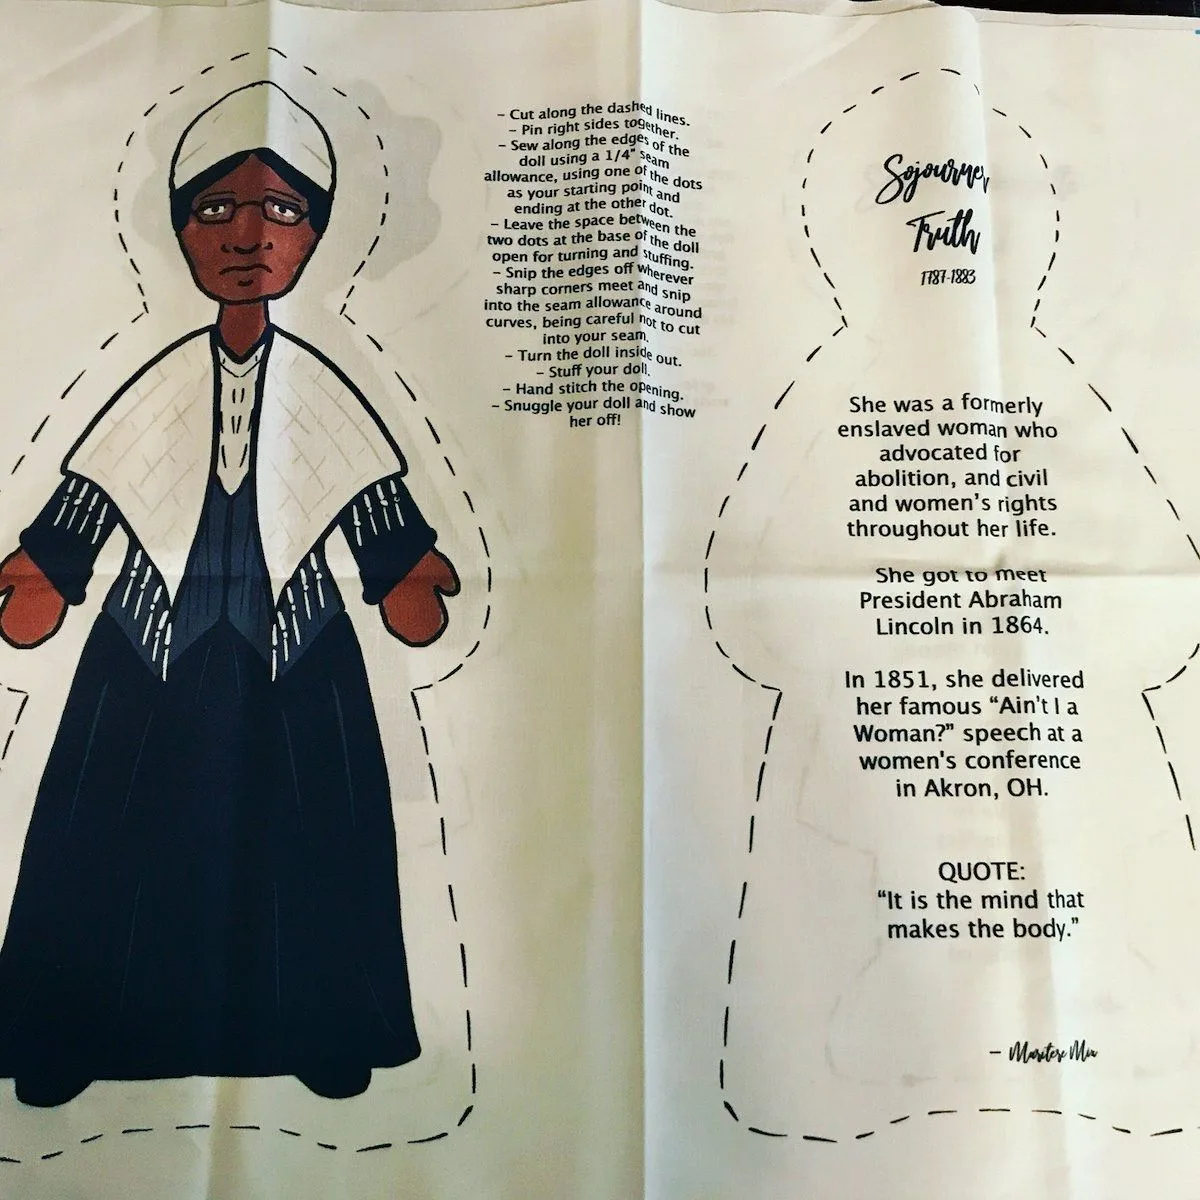 Educational Sojourner Truth doll